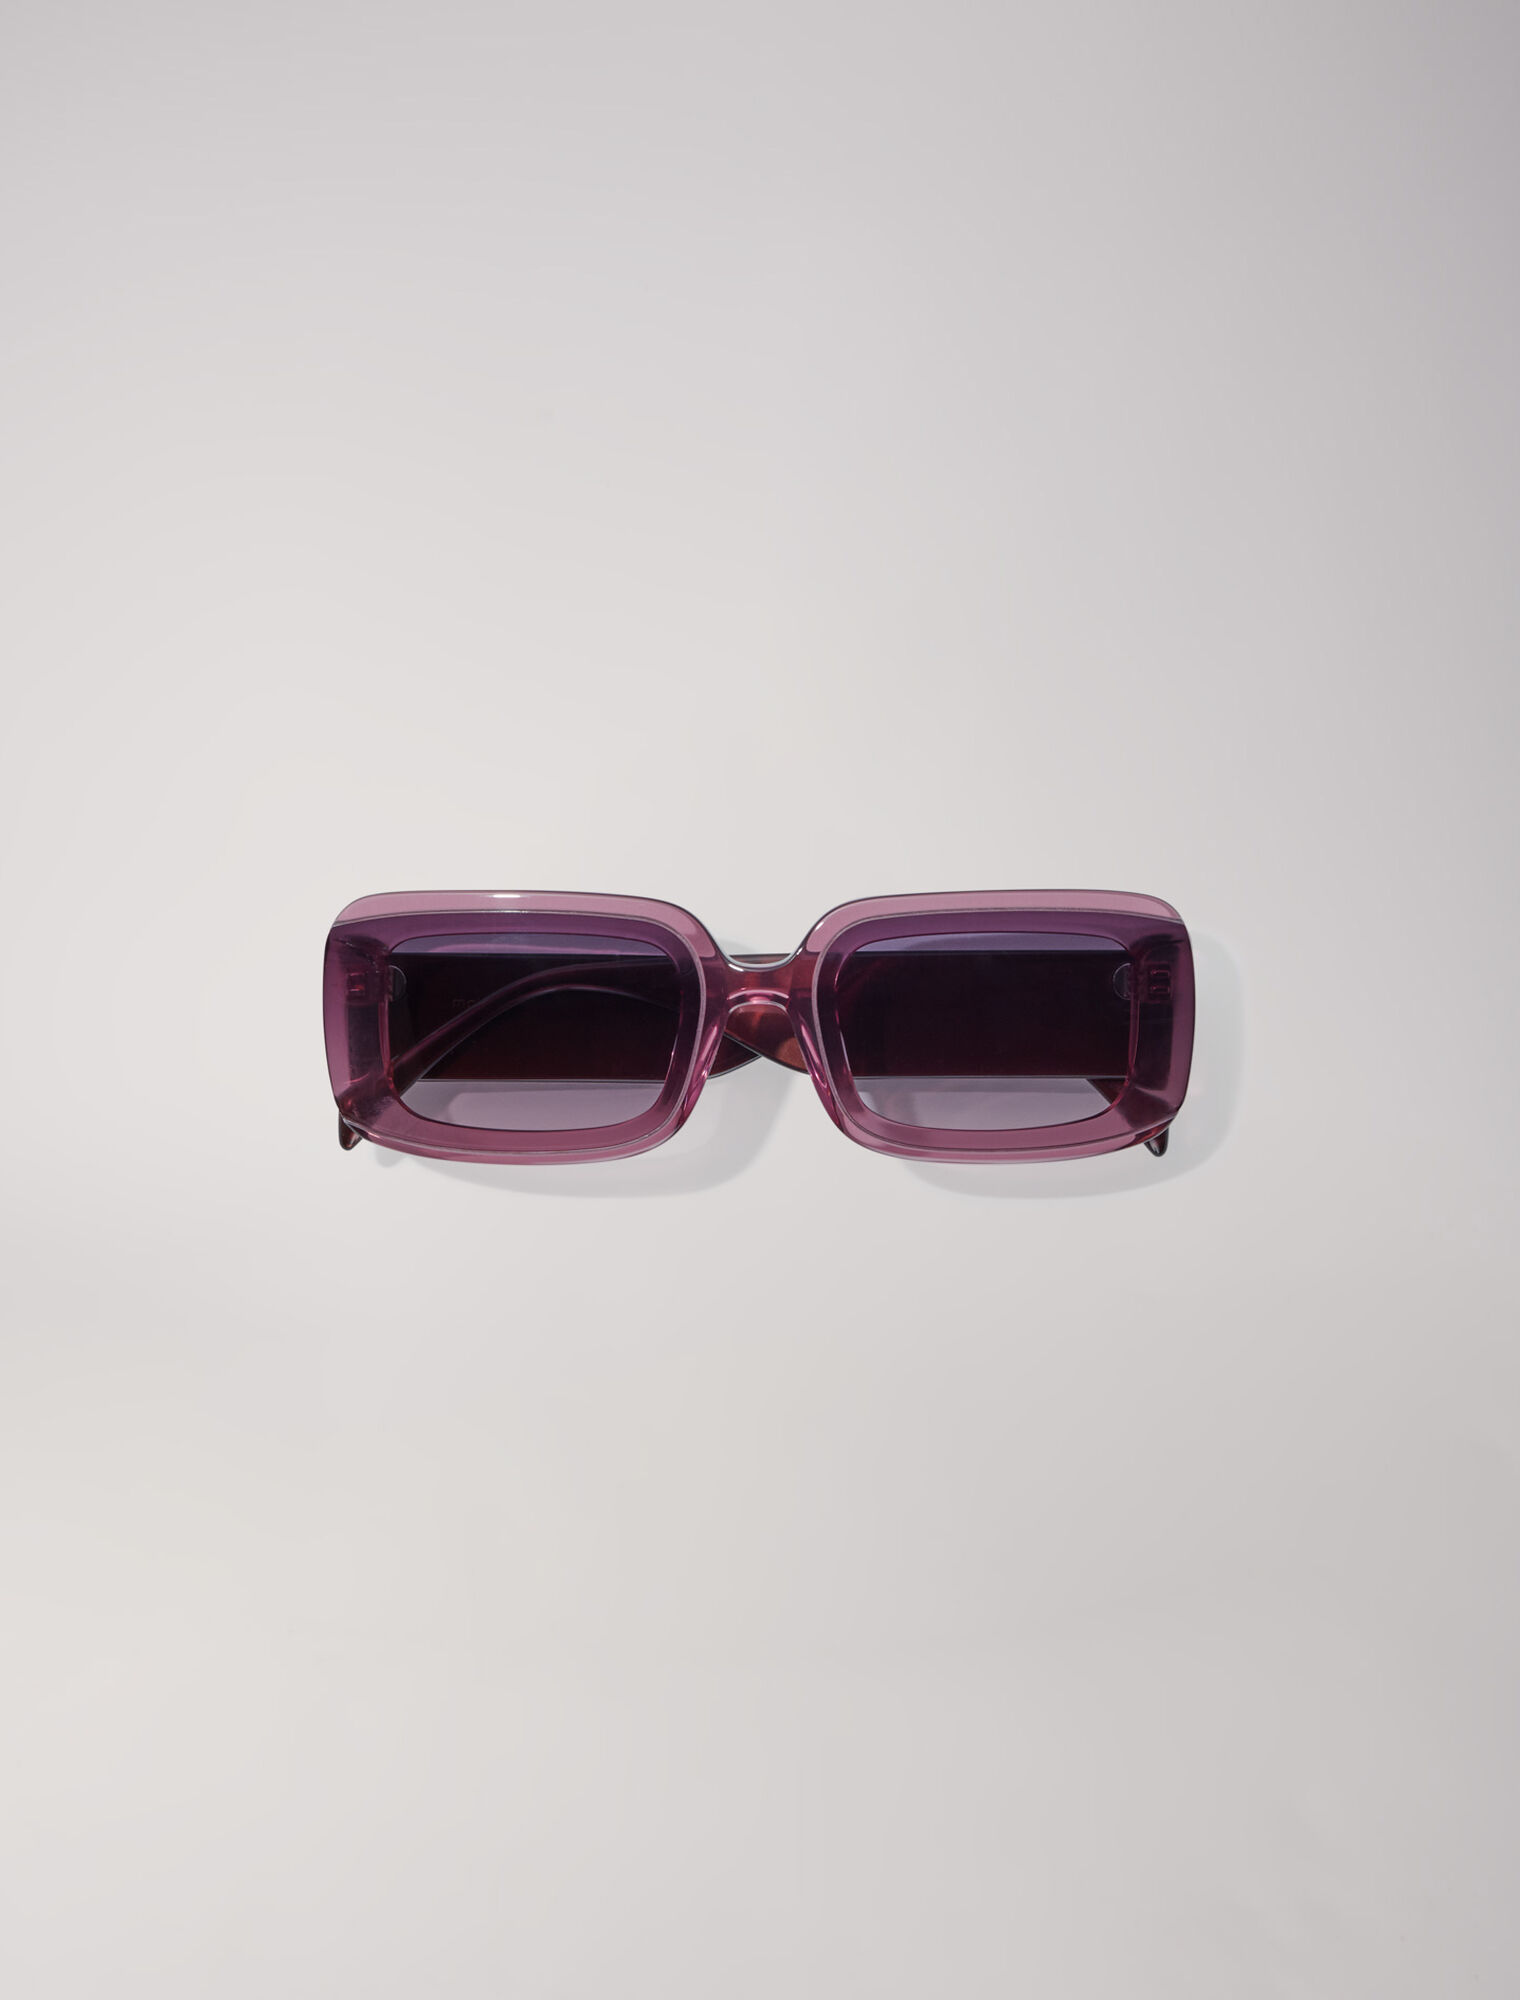 Acetate glasses with smoked lenses